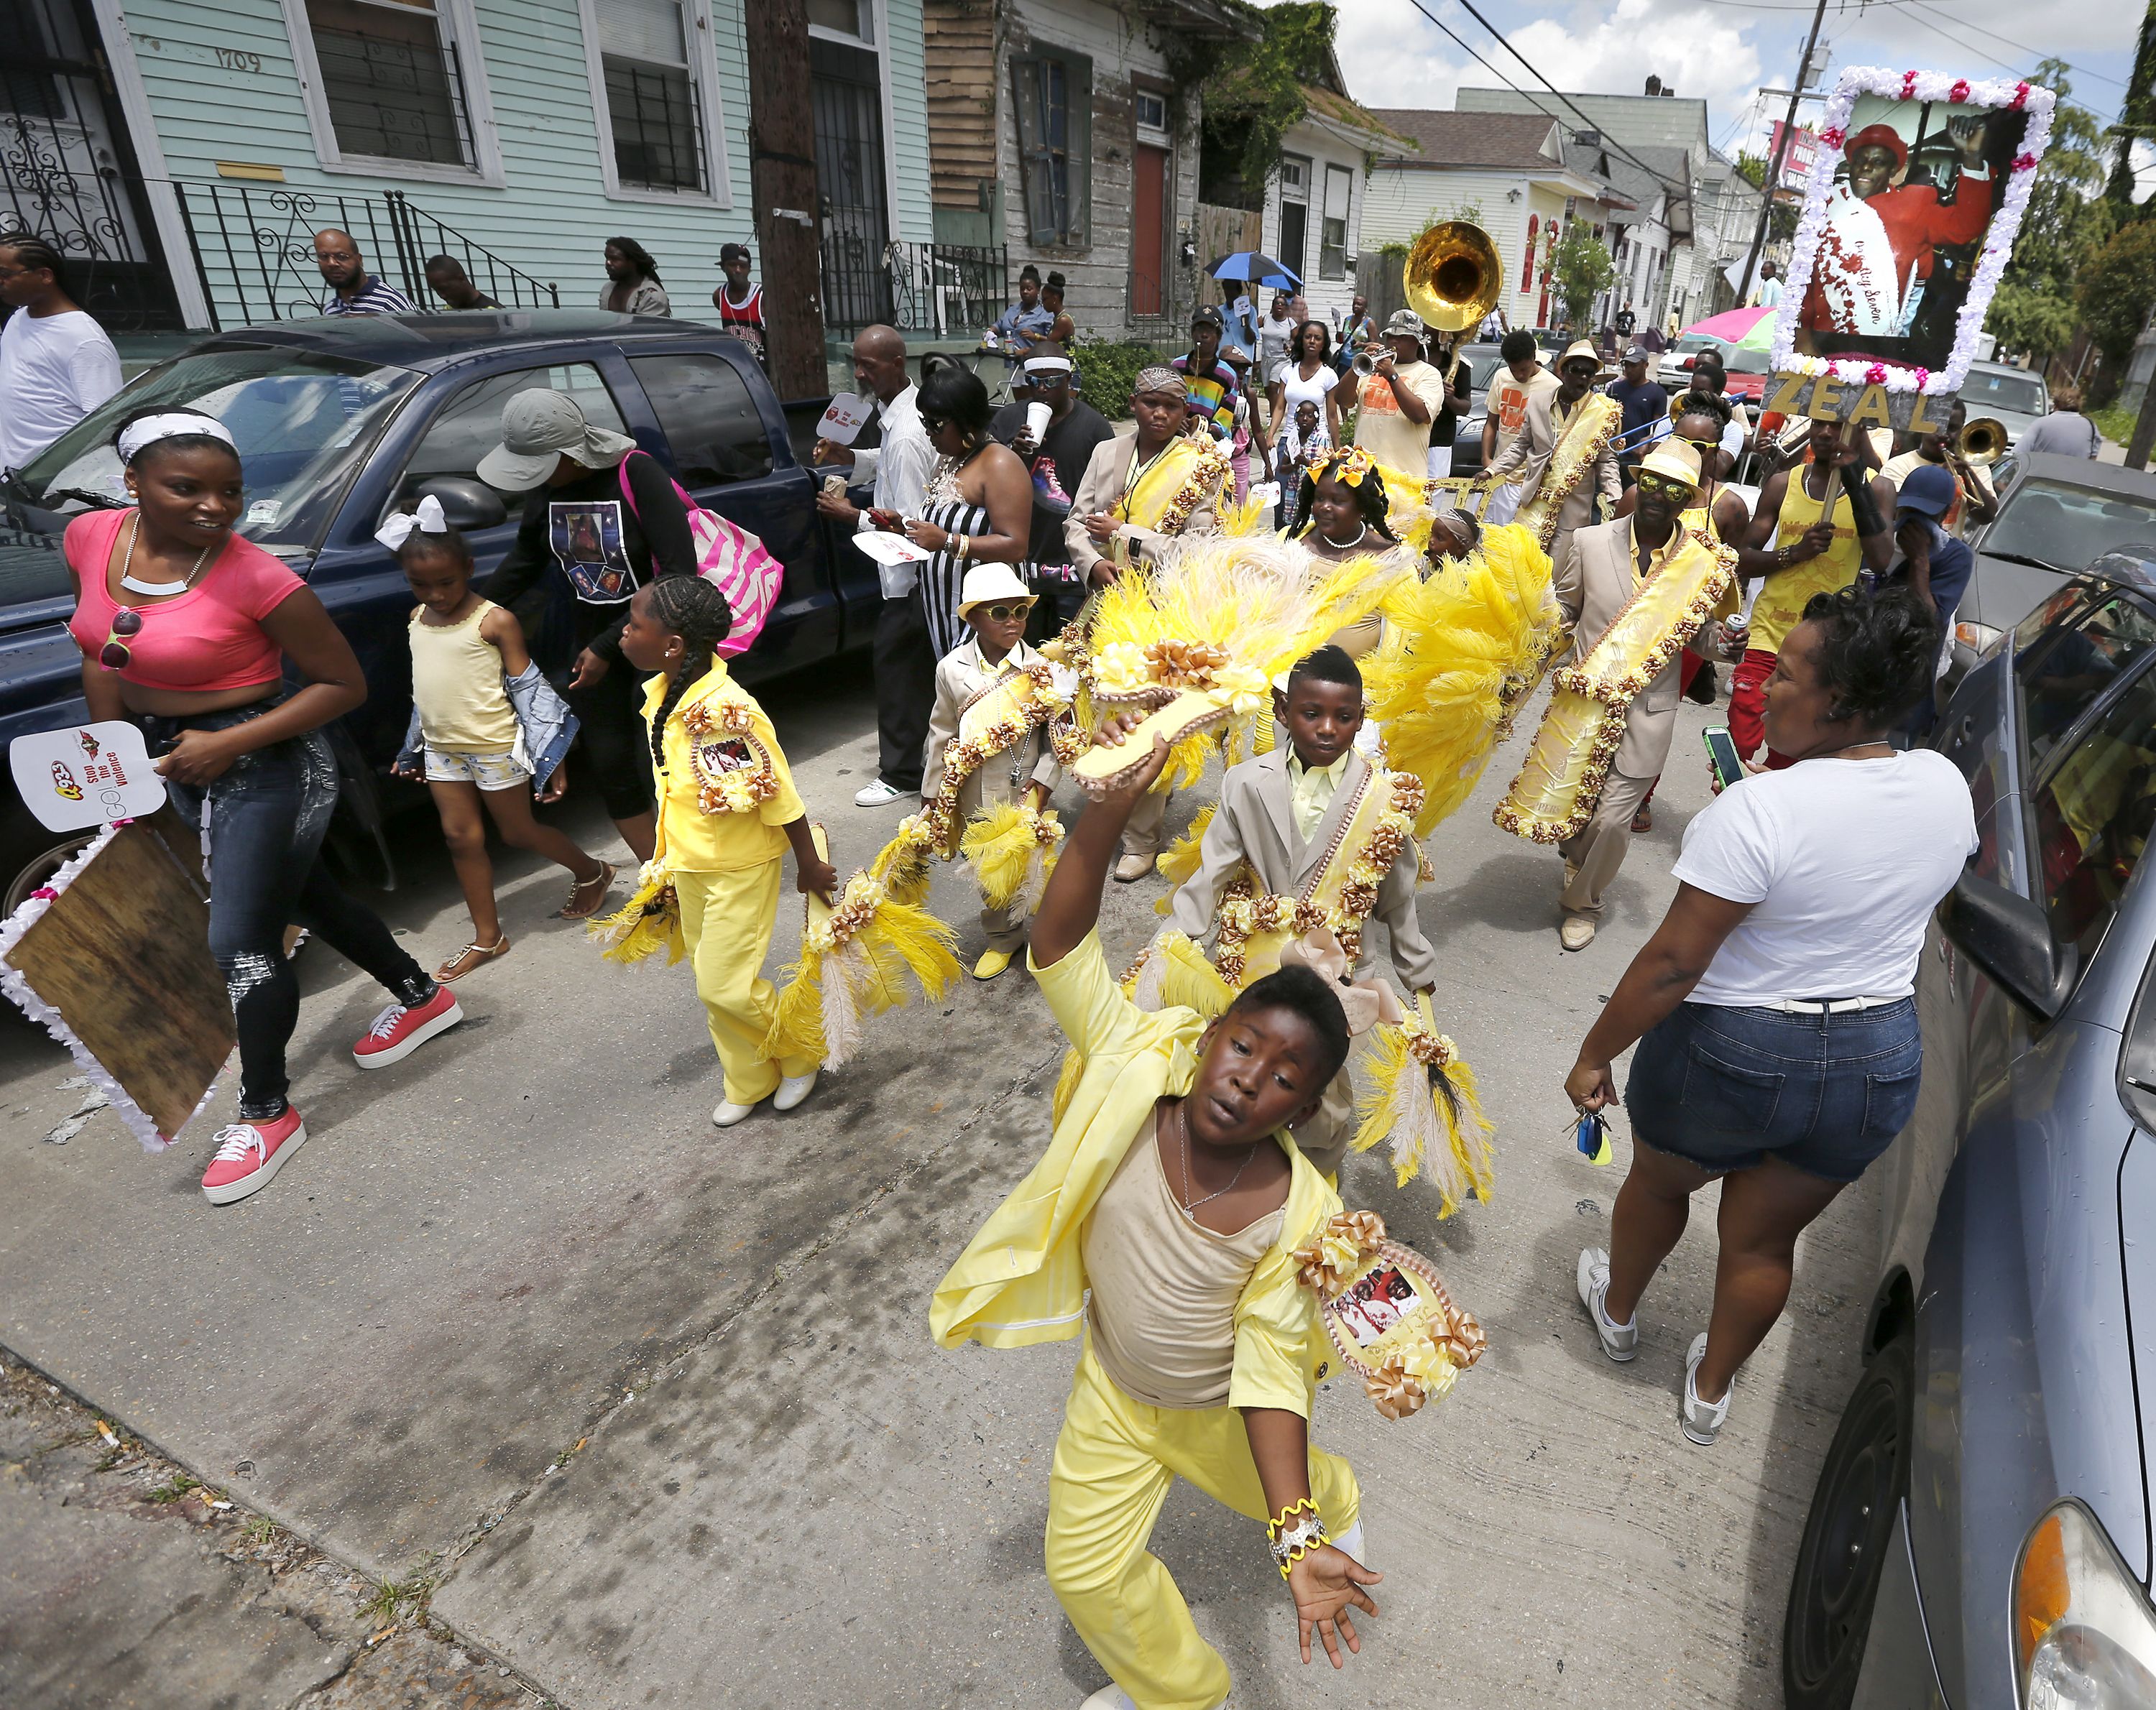 A second-line proceeds down a New Orleans street, where cars are parked on each side. In the roadway are dozens of social aid and pleasure club members who, dressed in yellow and holding fans and other props, dance through the street.